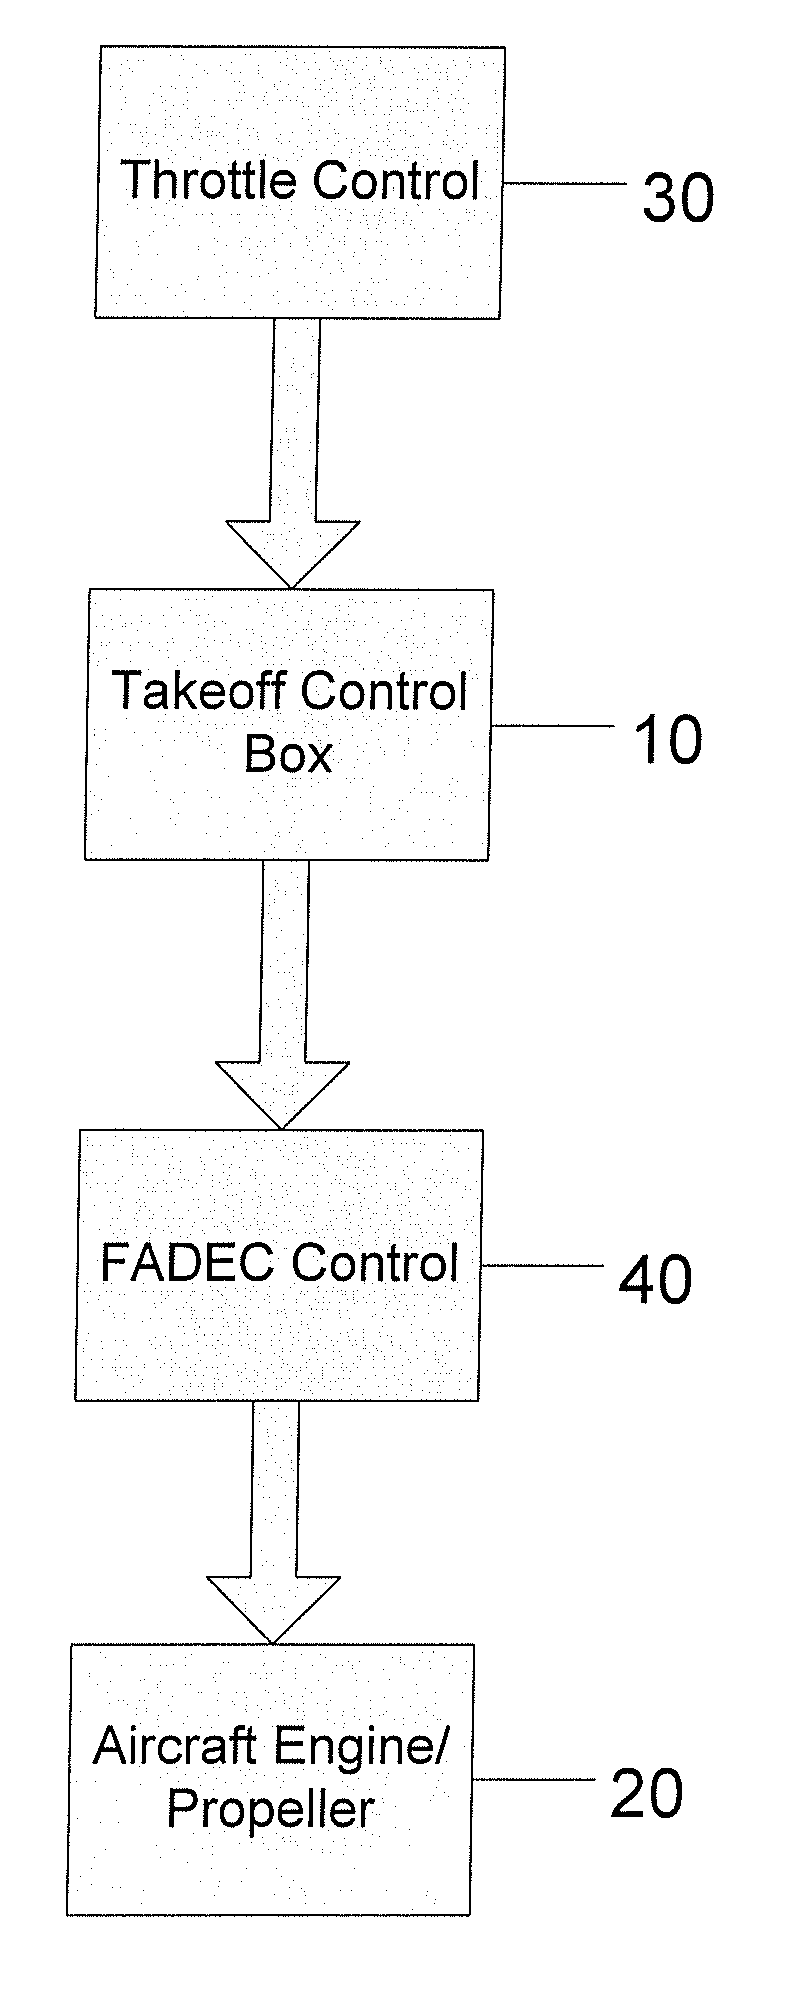 Control system for controlling propeller aircraft engine during takeoff